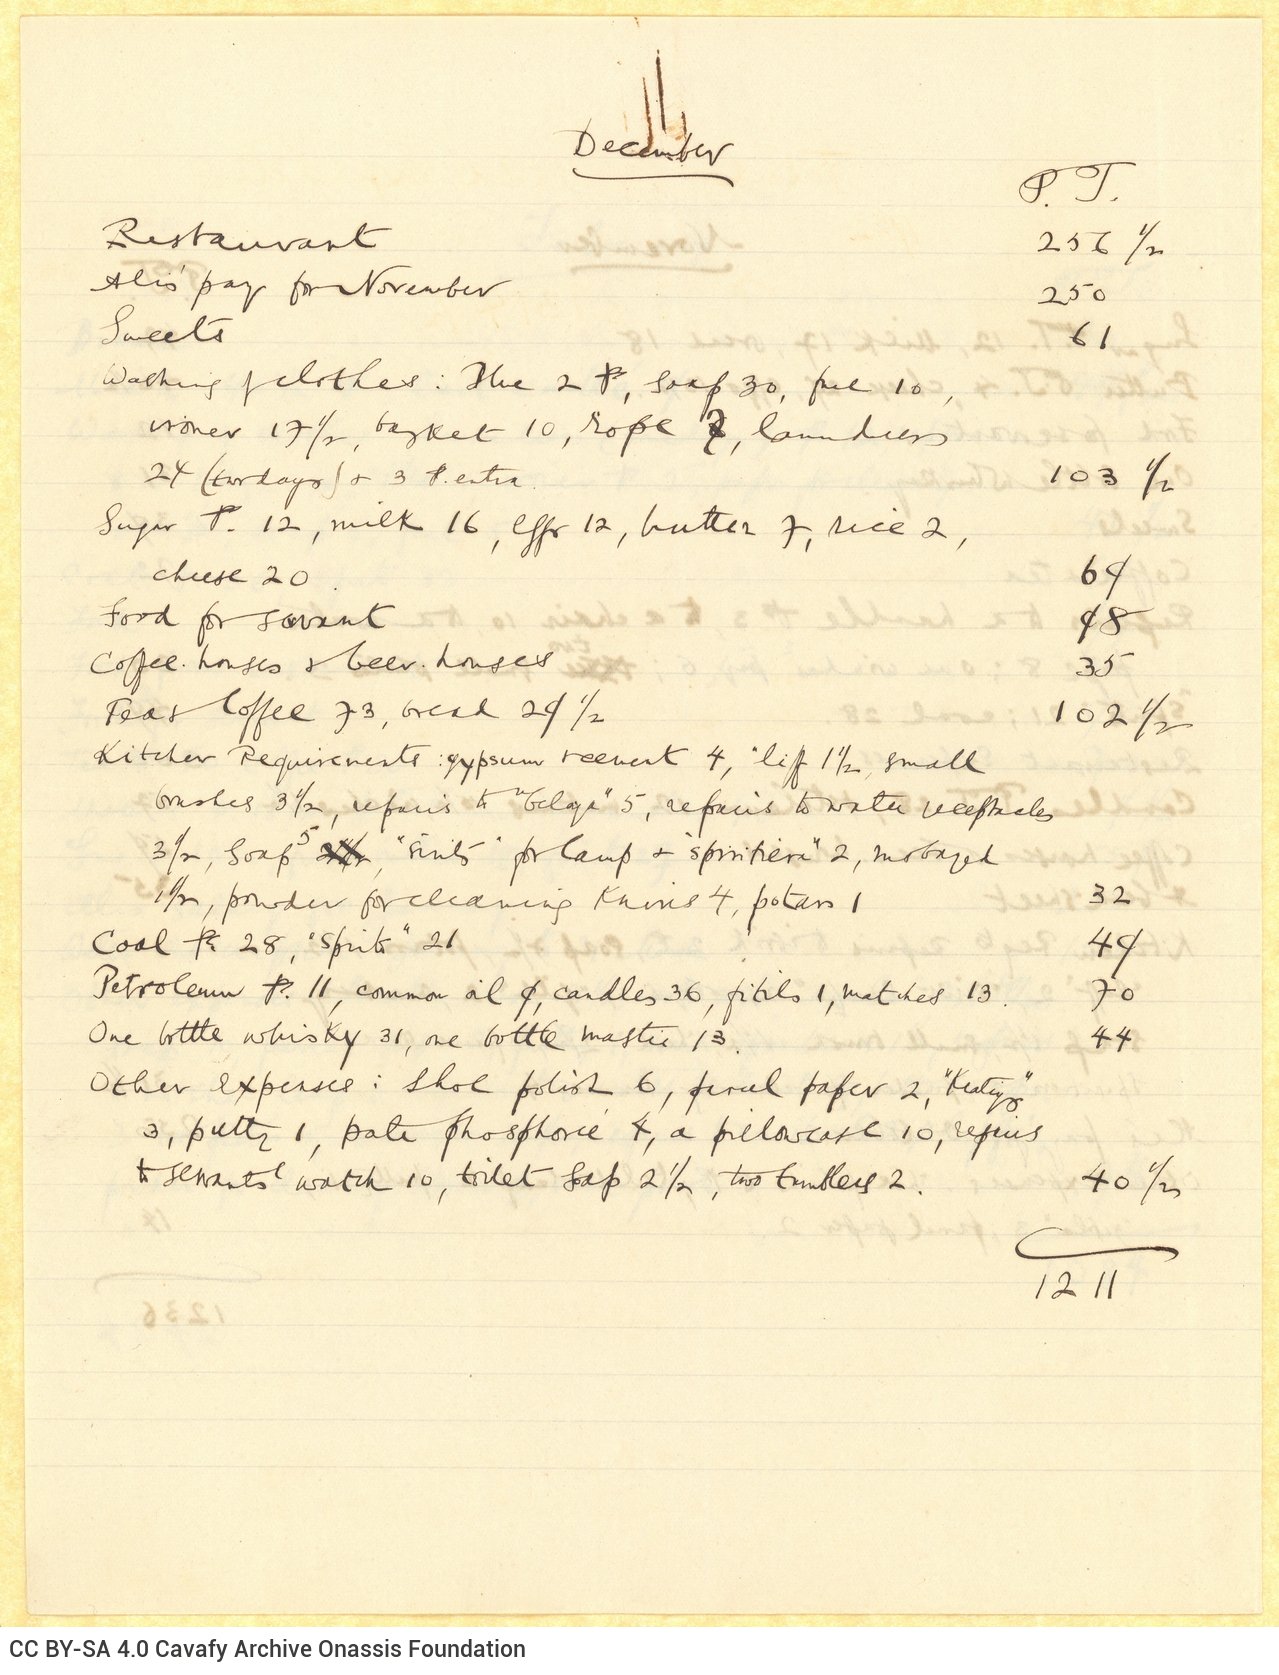 Handwritten monthly list of expenses for the years 1932-1933, on four double sheet notepapers. Accompanied by a piece of p